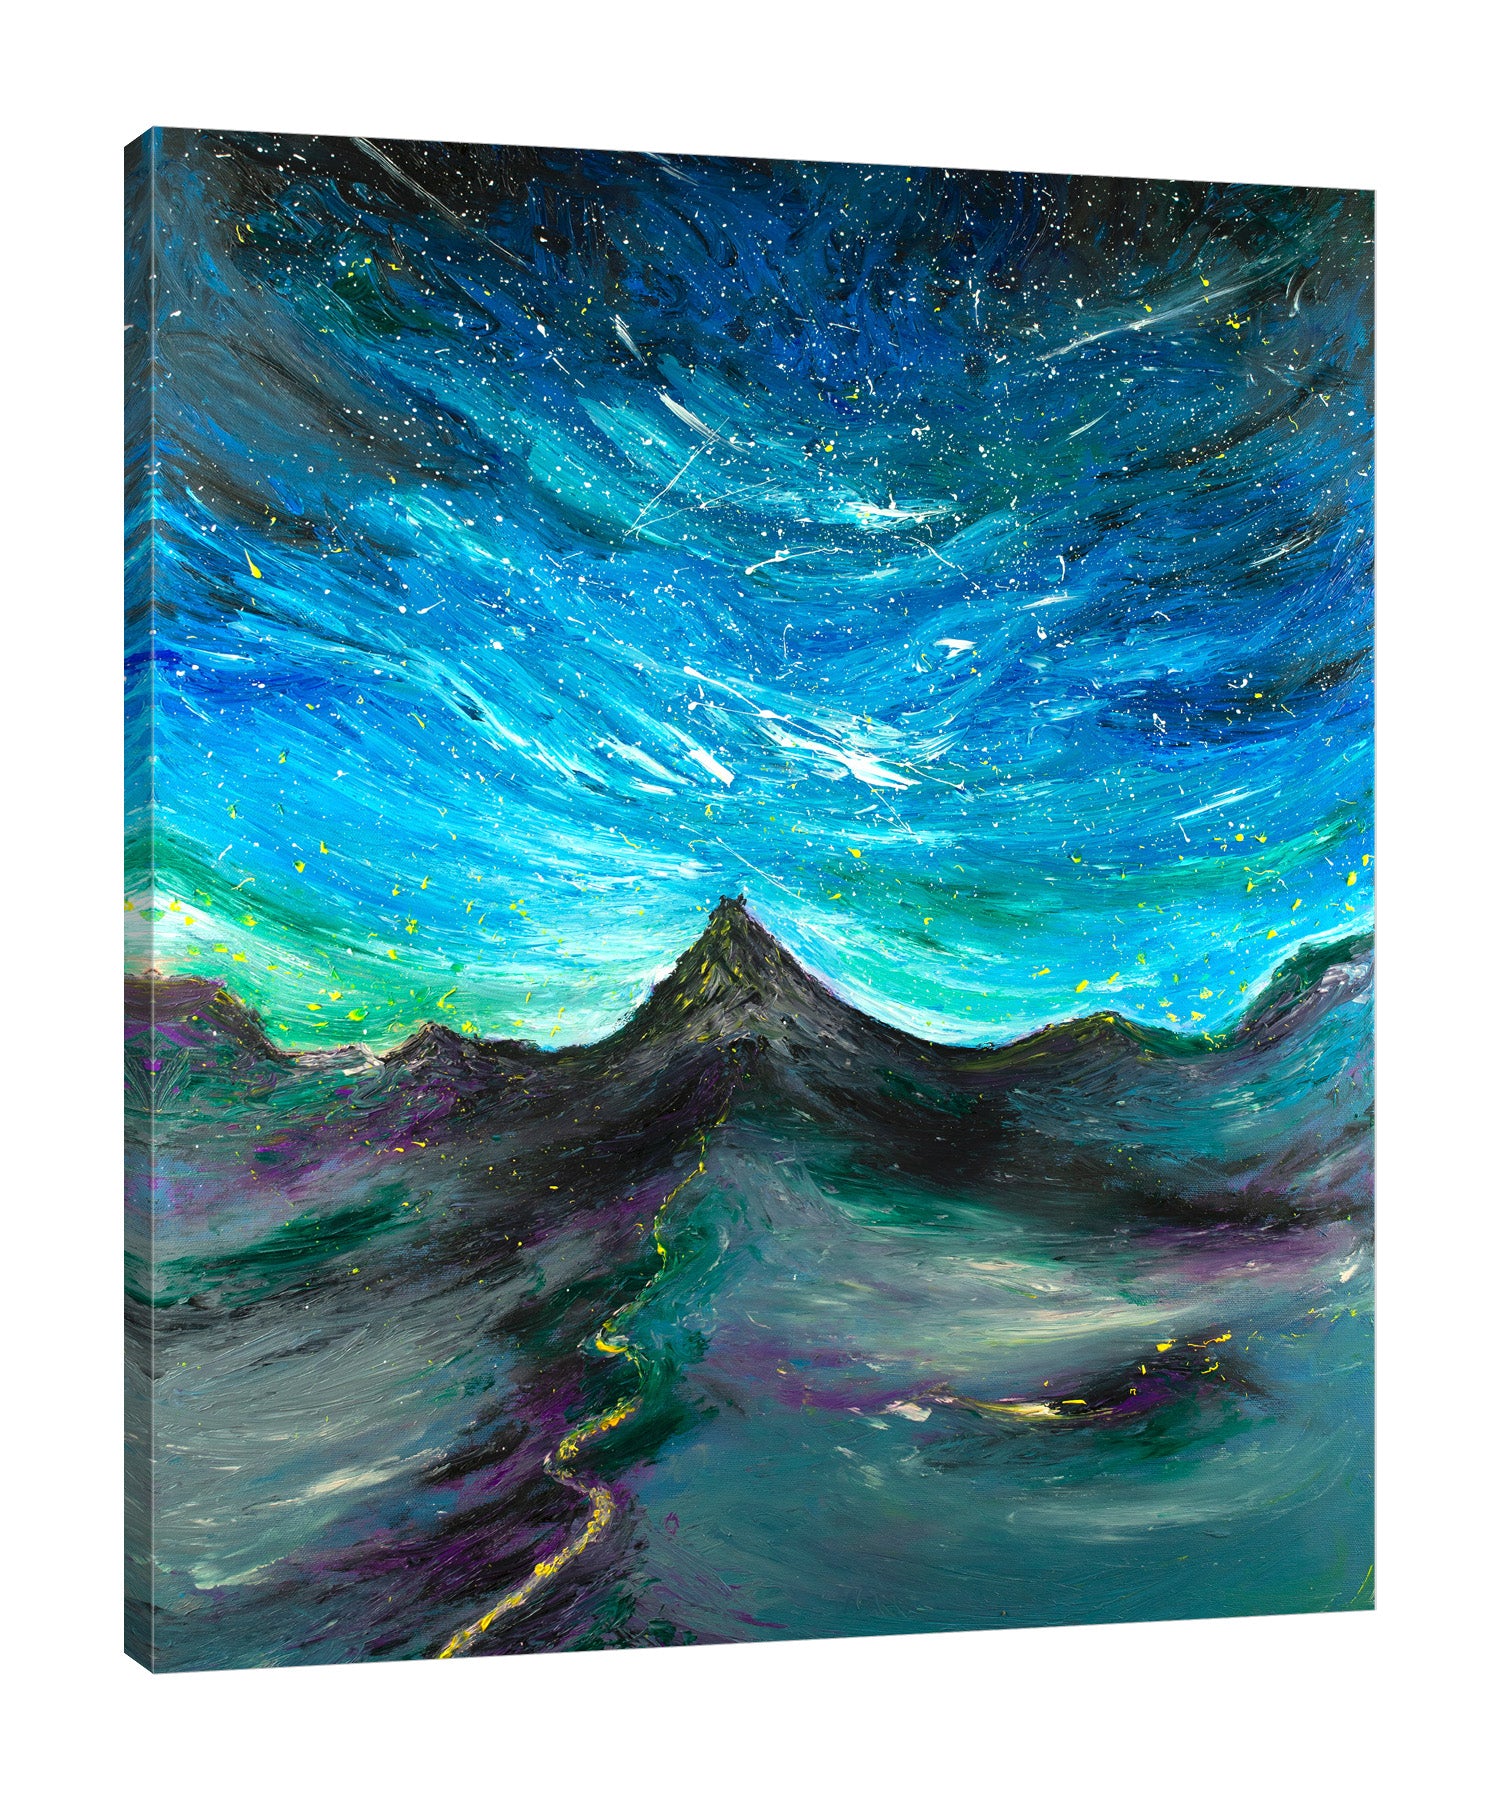 Chiara-Magni,Modern & Contemporary,Landscape & Nature,Finger-paint,enchanted,mountain,mountains,skies,stars,blue,stars,starry,road,portrait,